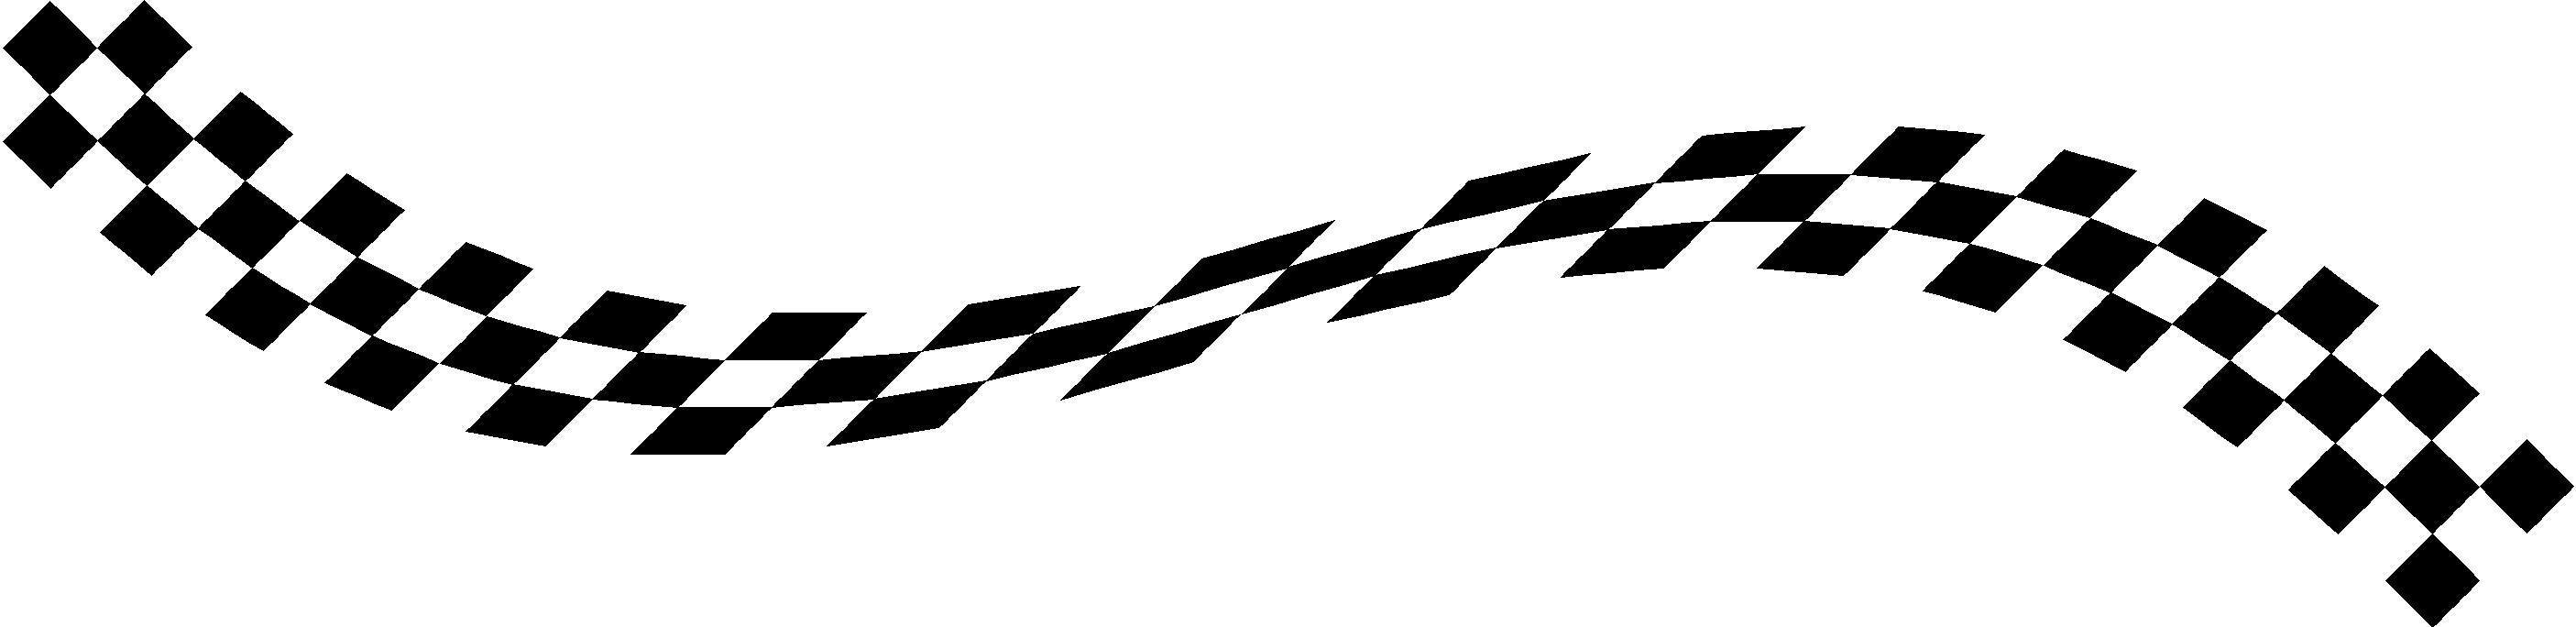 Checkered flag pictures clipart - FamClipart